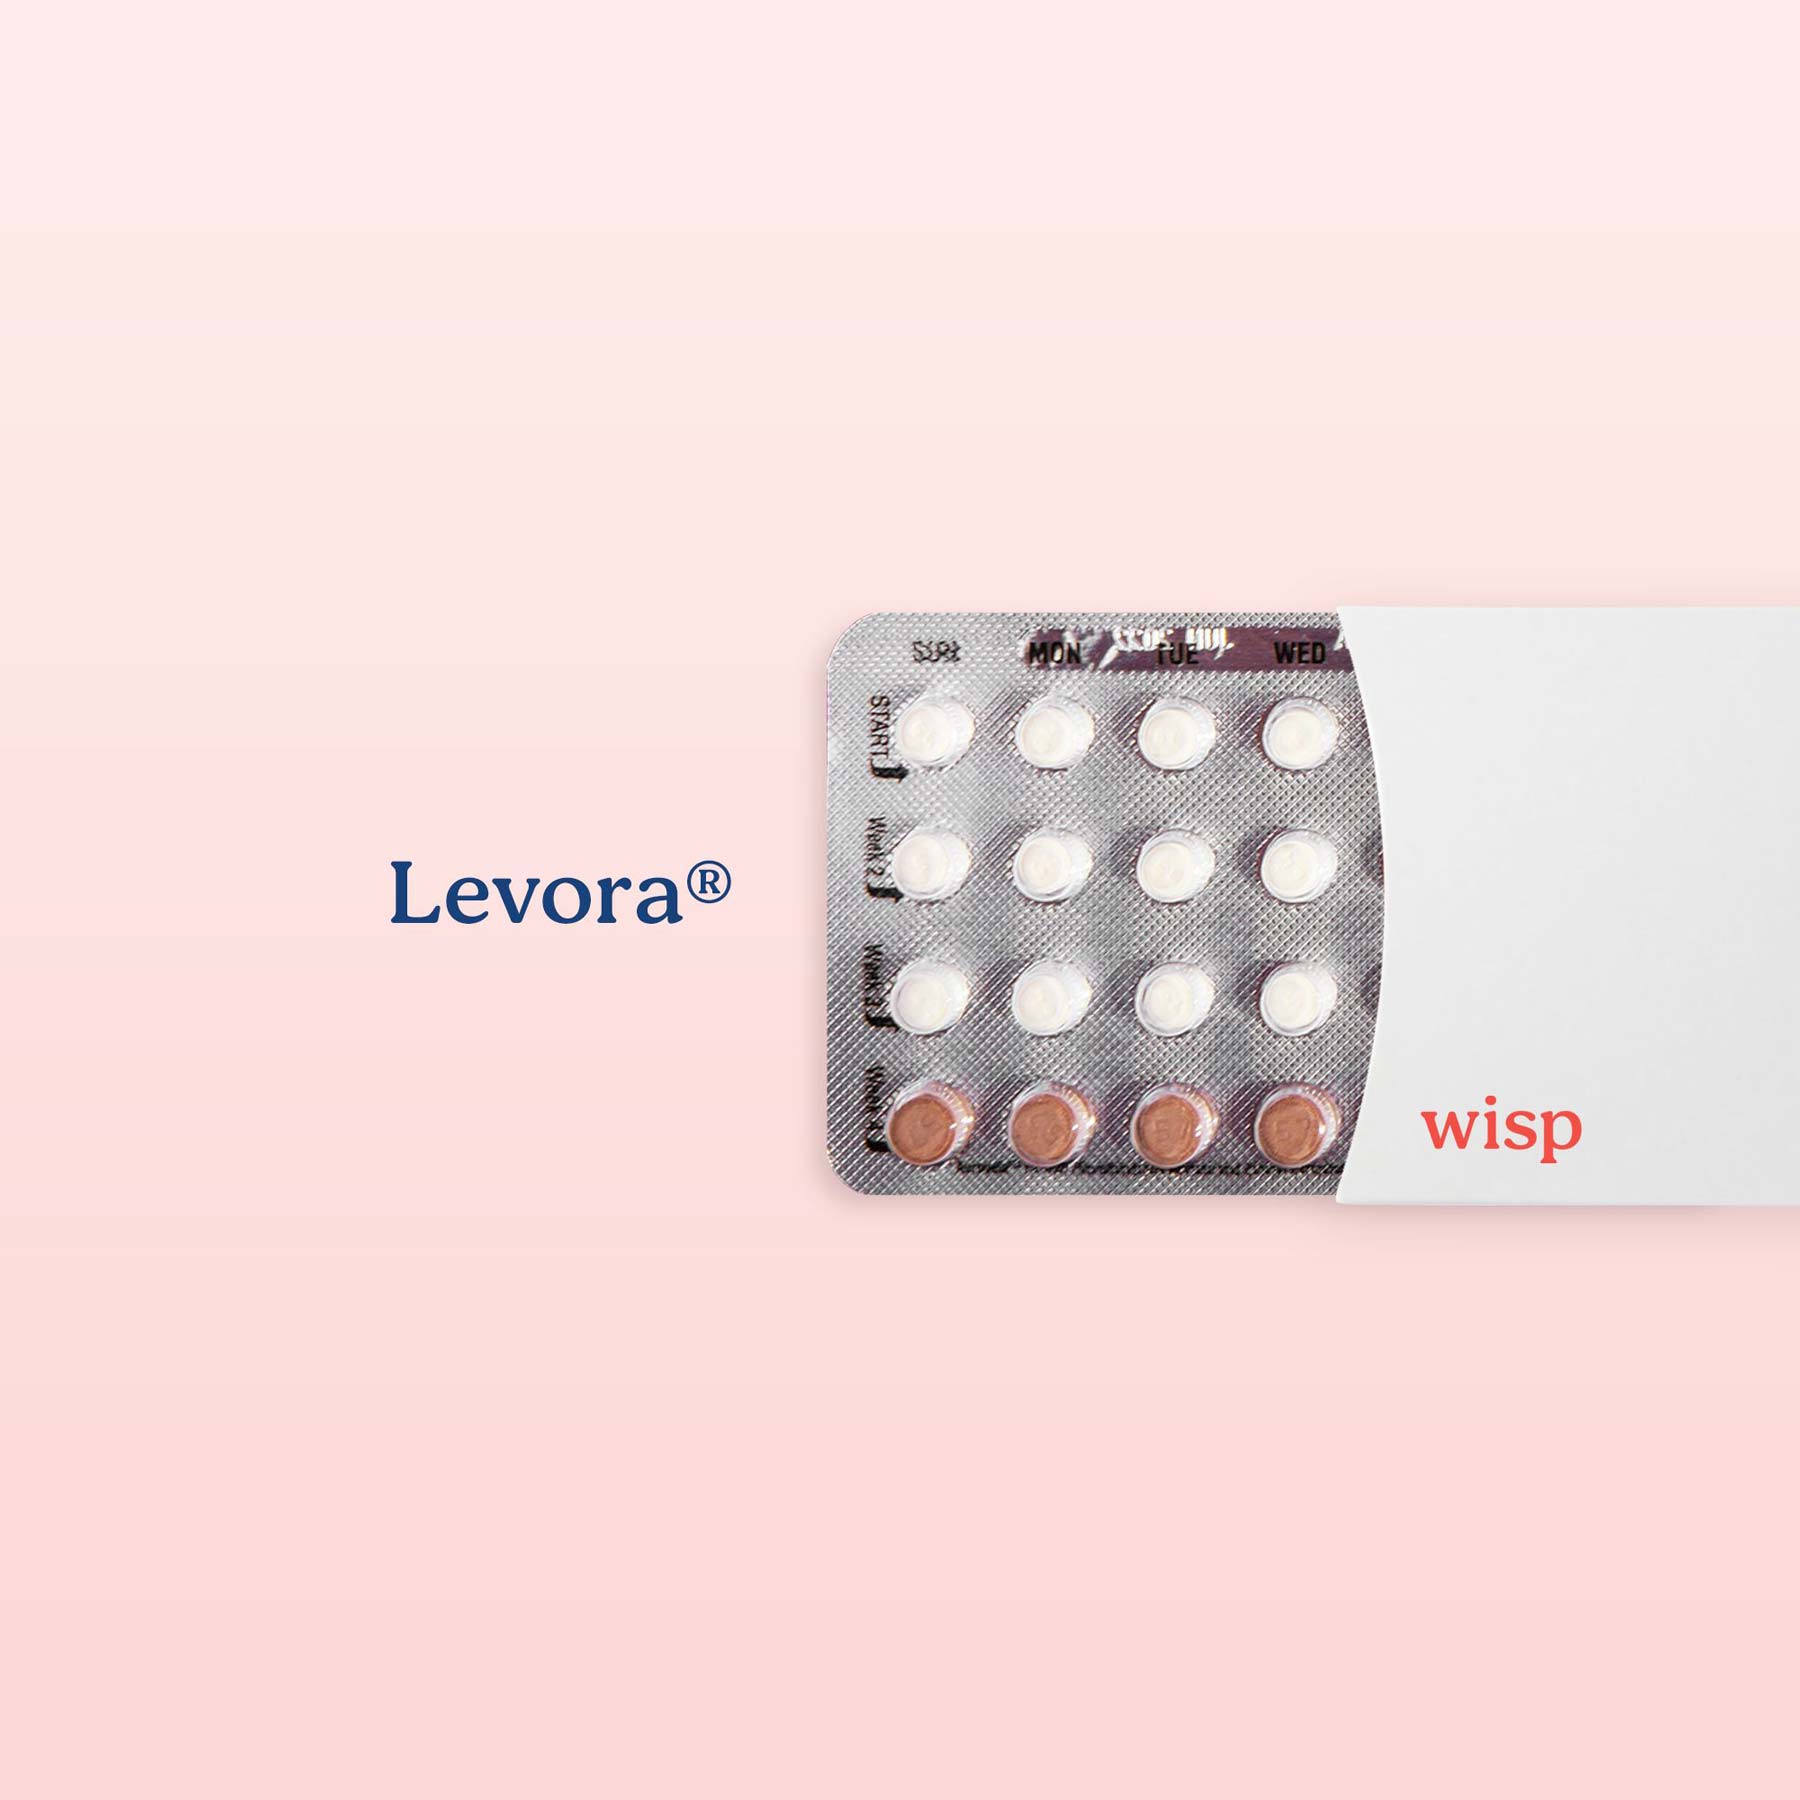 Packet of Levora birth control pills on a pink background